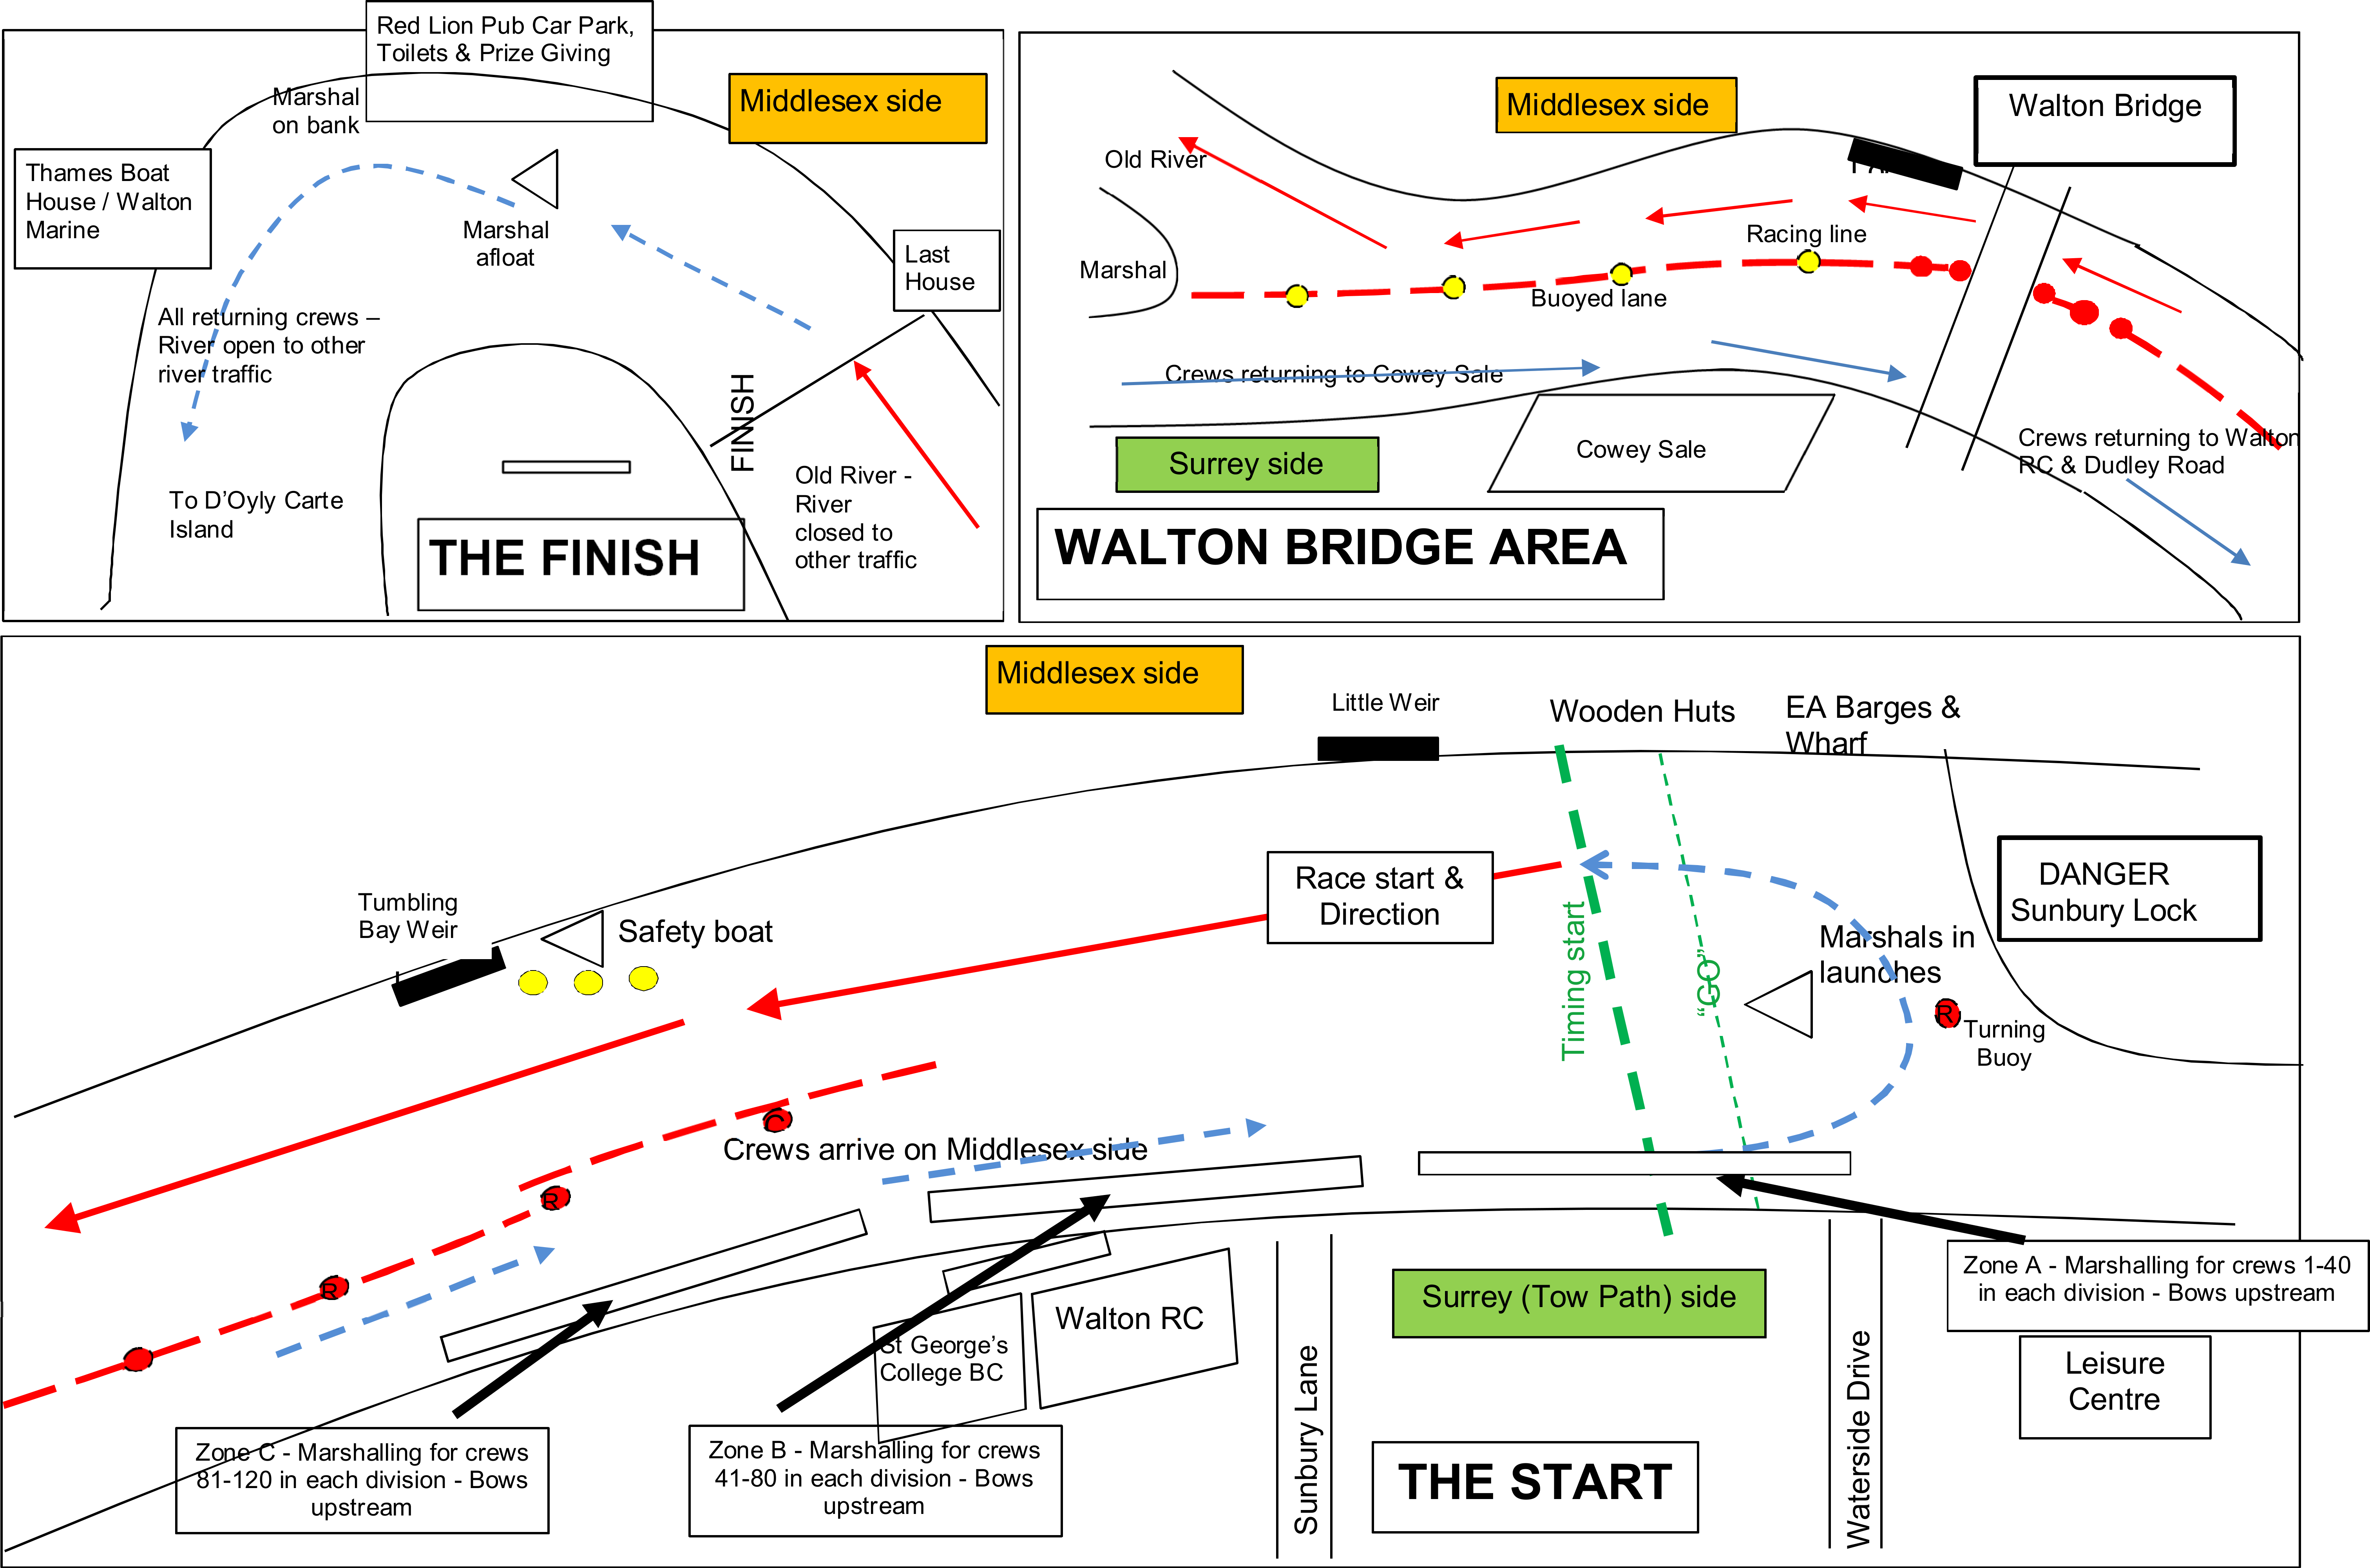 A map showing details of the Start, Finish and Walton Bridge